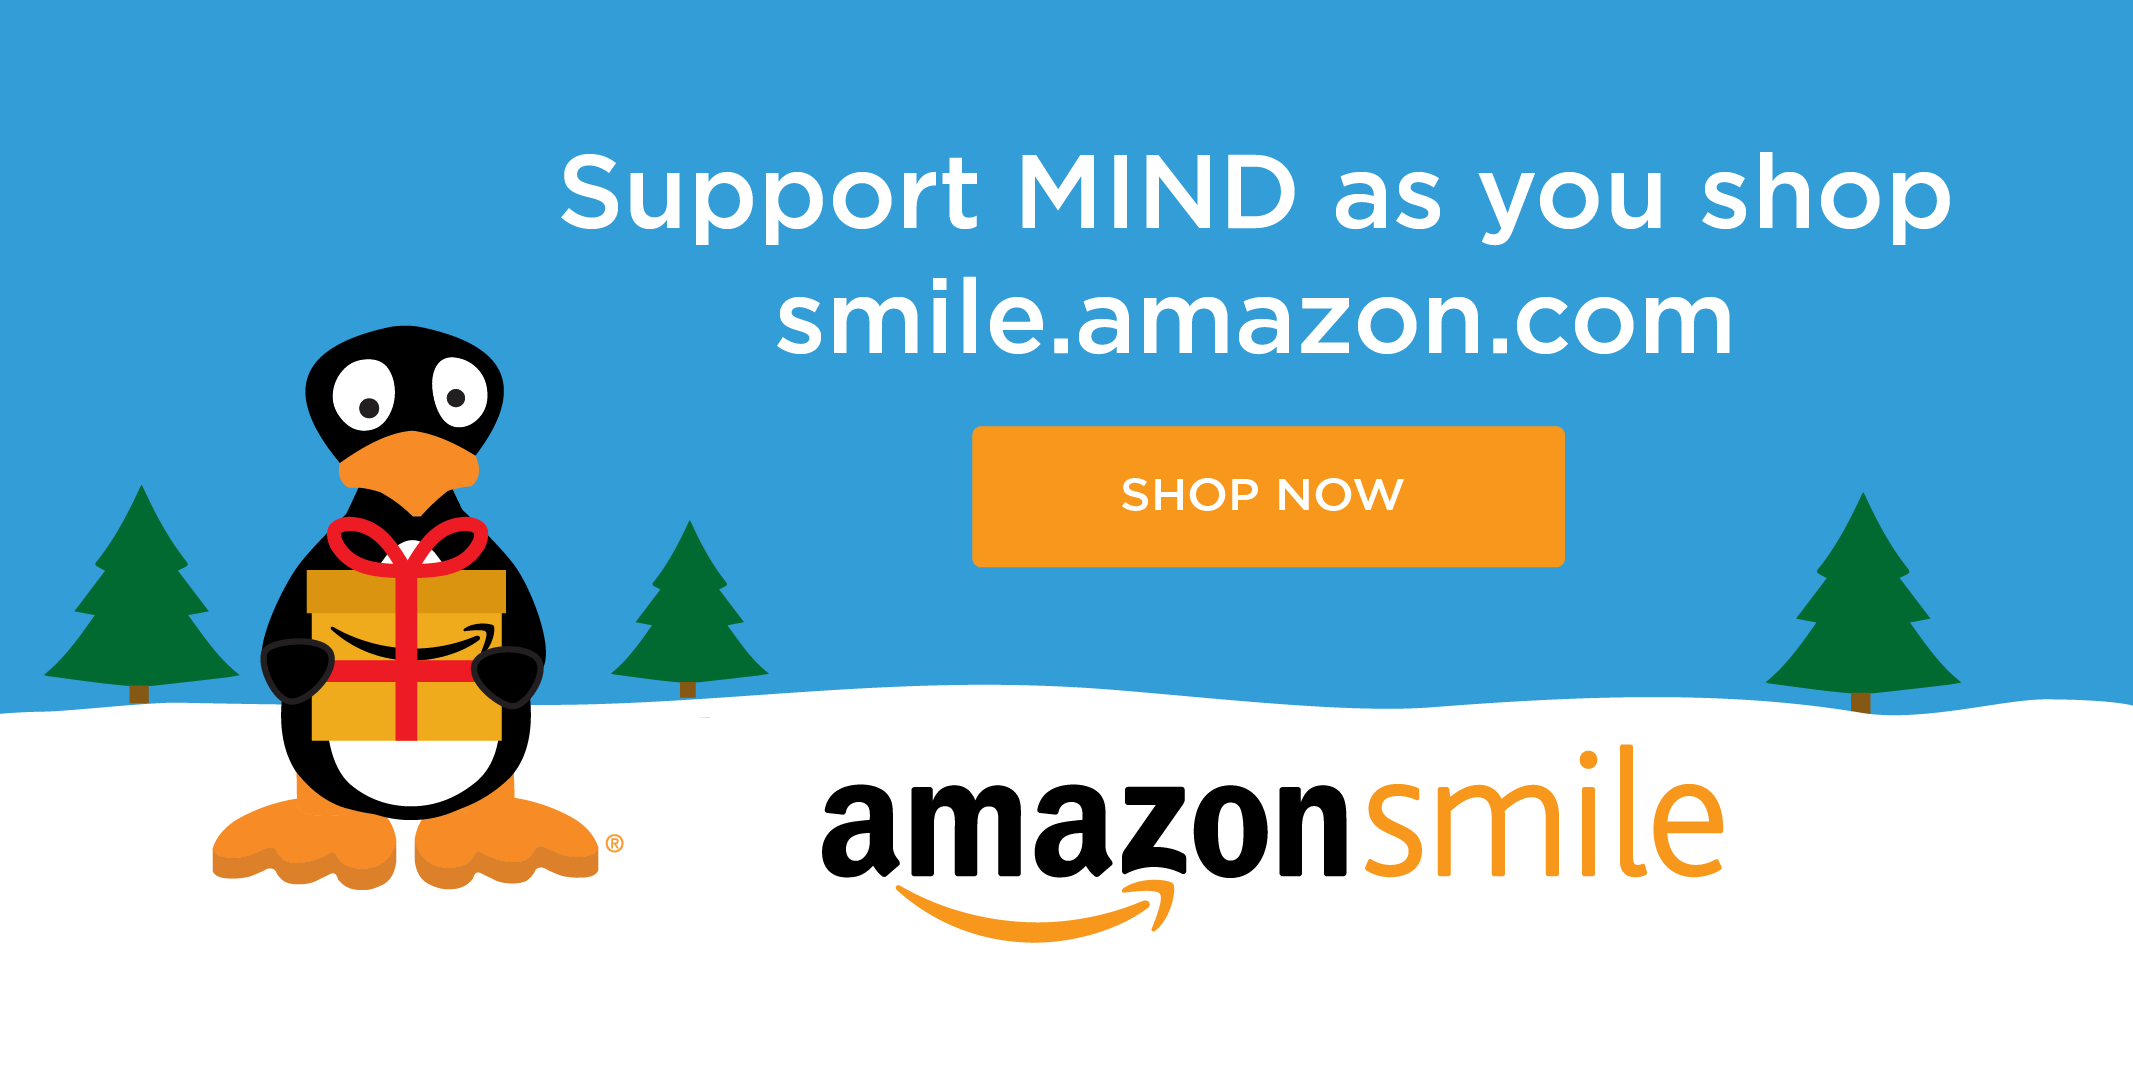 amazon-smile-holiday-promotion-social-media-images-fb